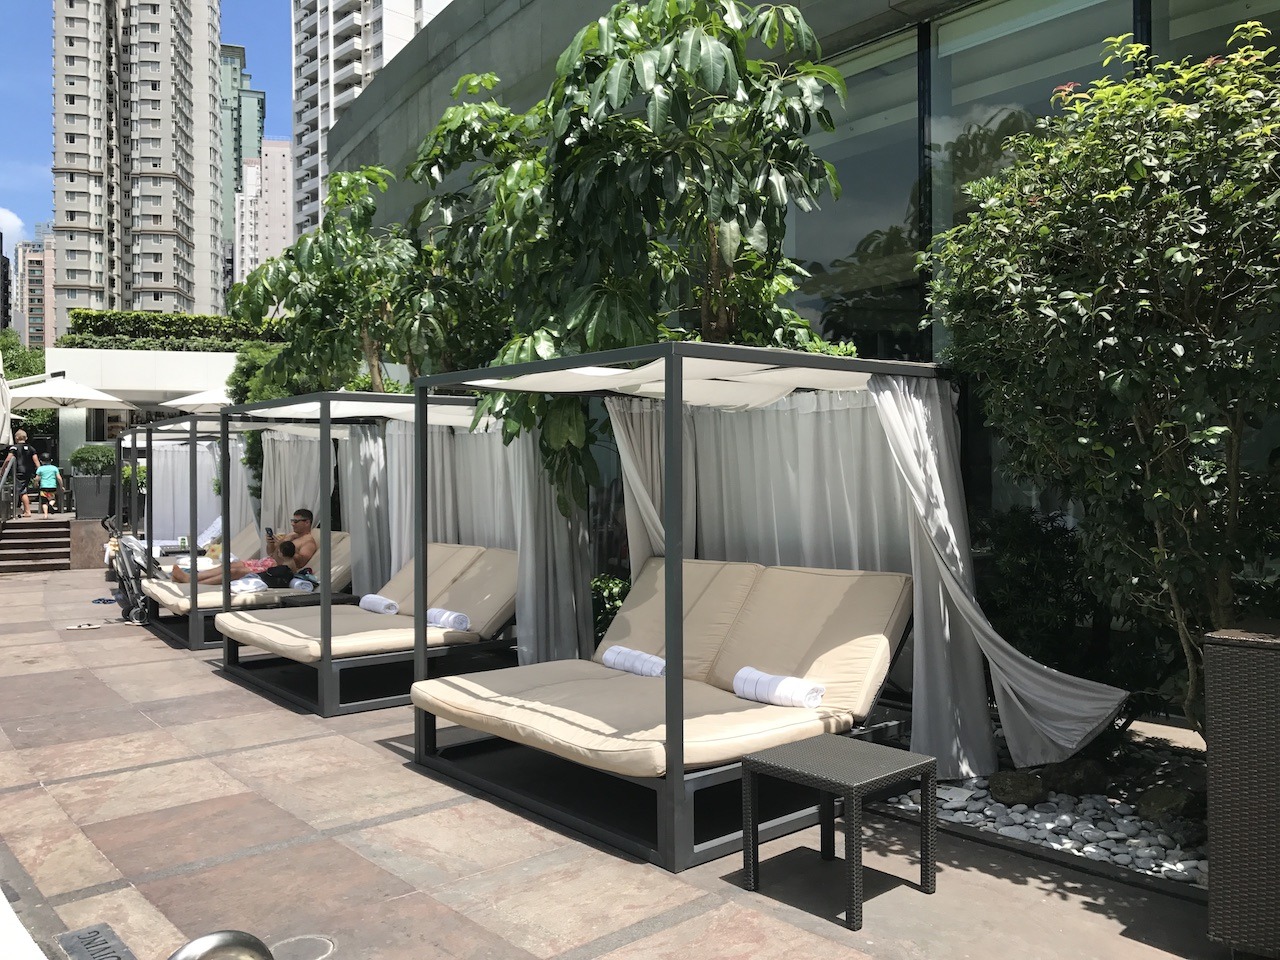 Resort-style loungers